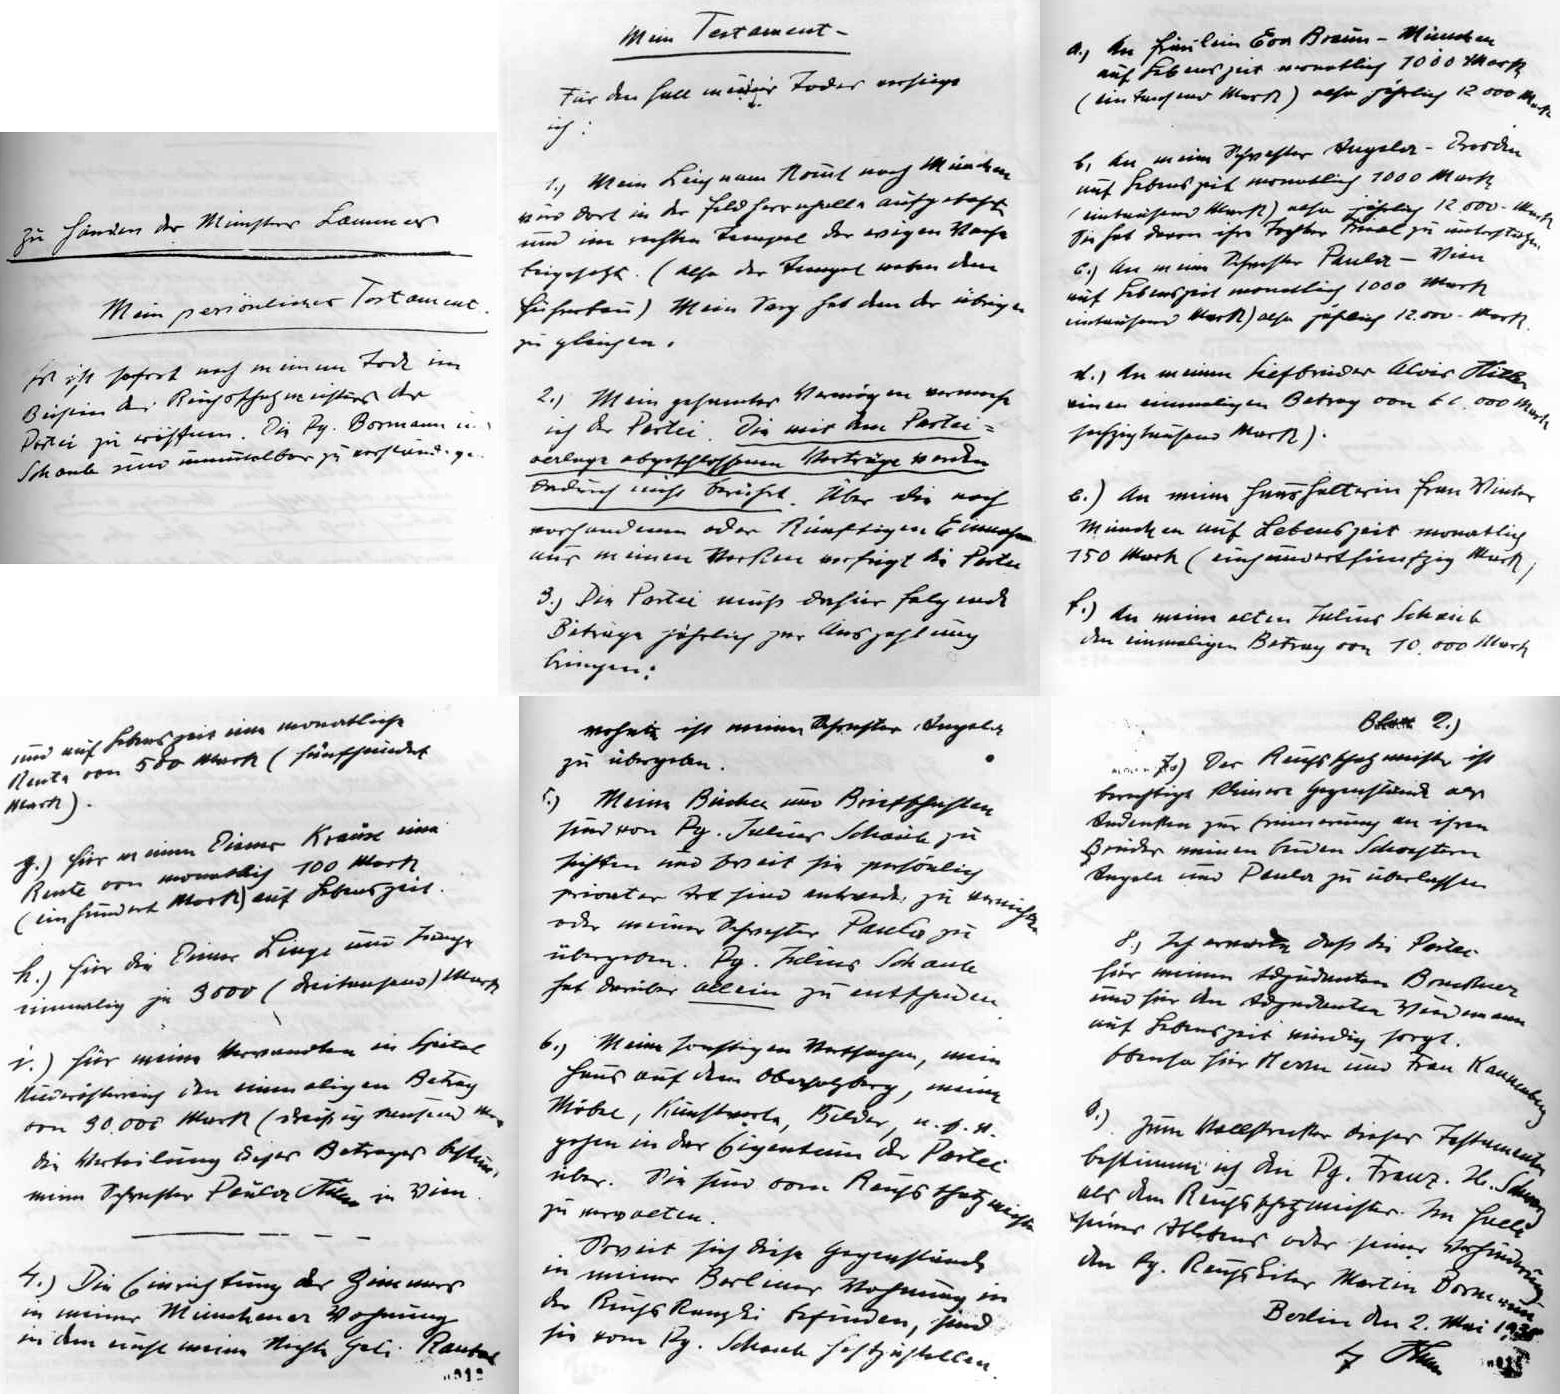 Handwritten private testament of Adolf Hitler dated 2 May 1938 (<a href=https://www.hitler-archive.com/articles.php?a=12>click here for the full text and translation</a>)